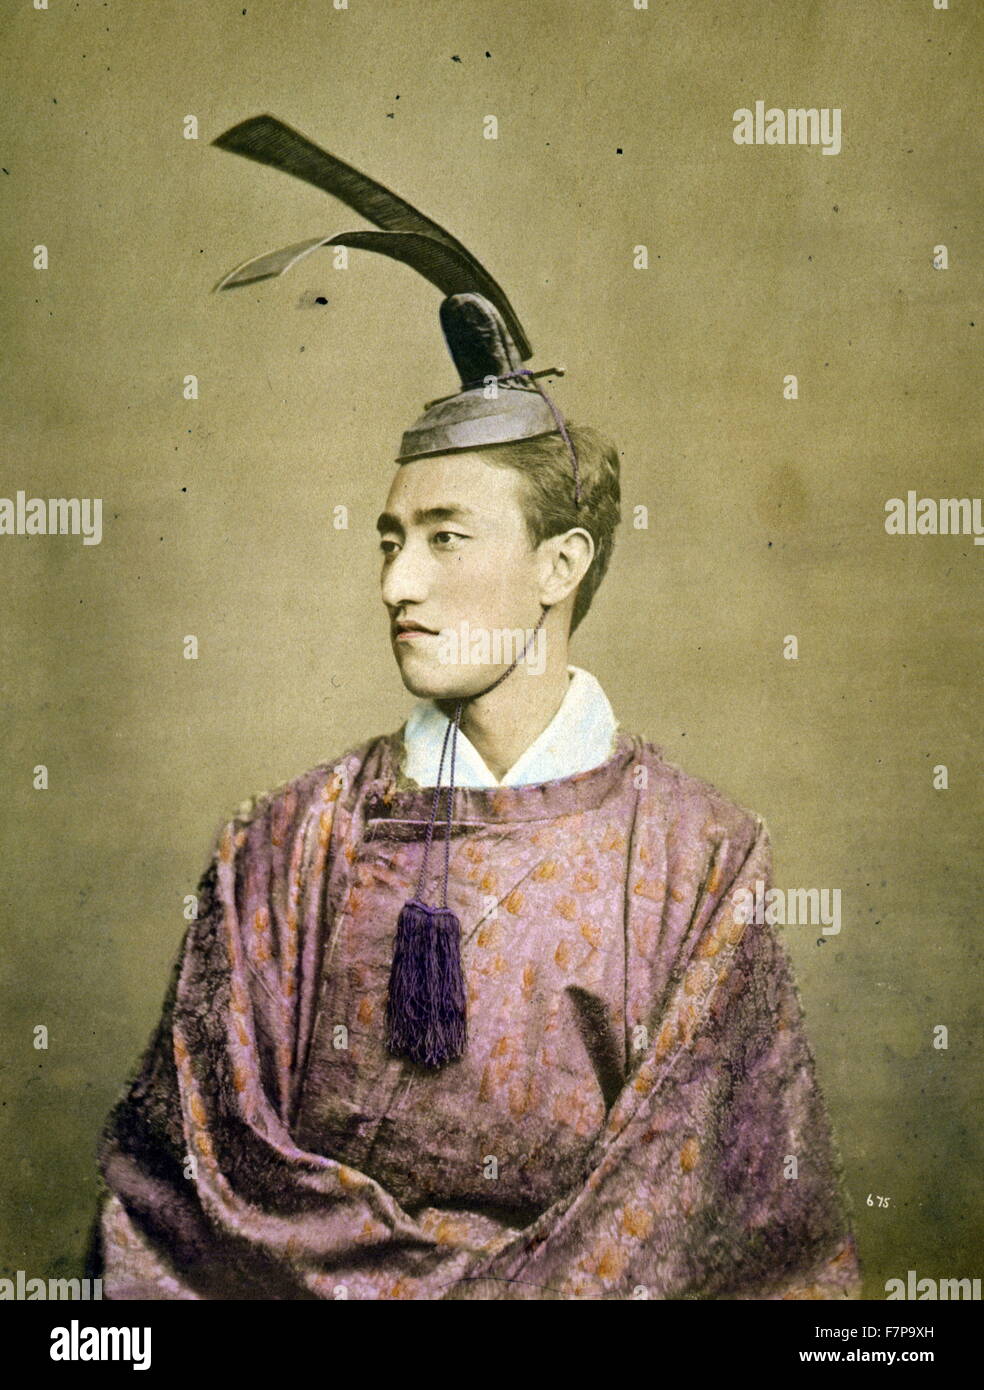 Photographic print, hand coloured with watercolour. Photograph shows a half-length studio portrait of a court official wearing a kanmuri (or kammuri), a crown-like hat worn by nobles and/or court officials. Stock Photo